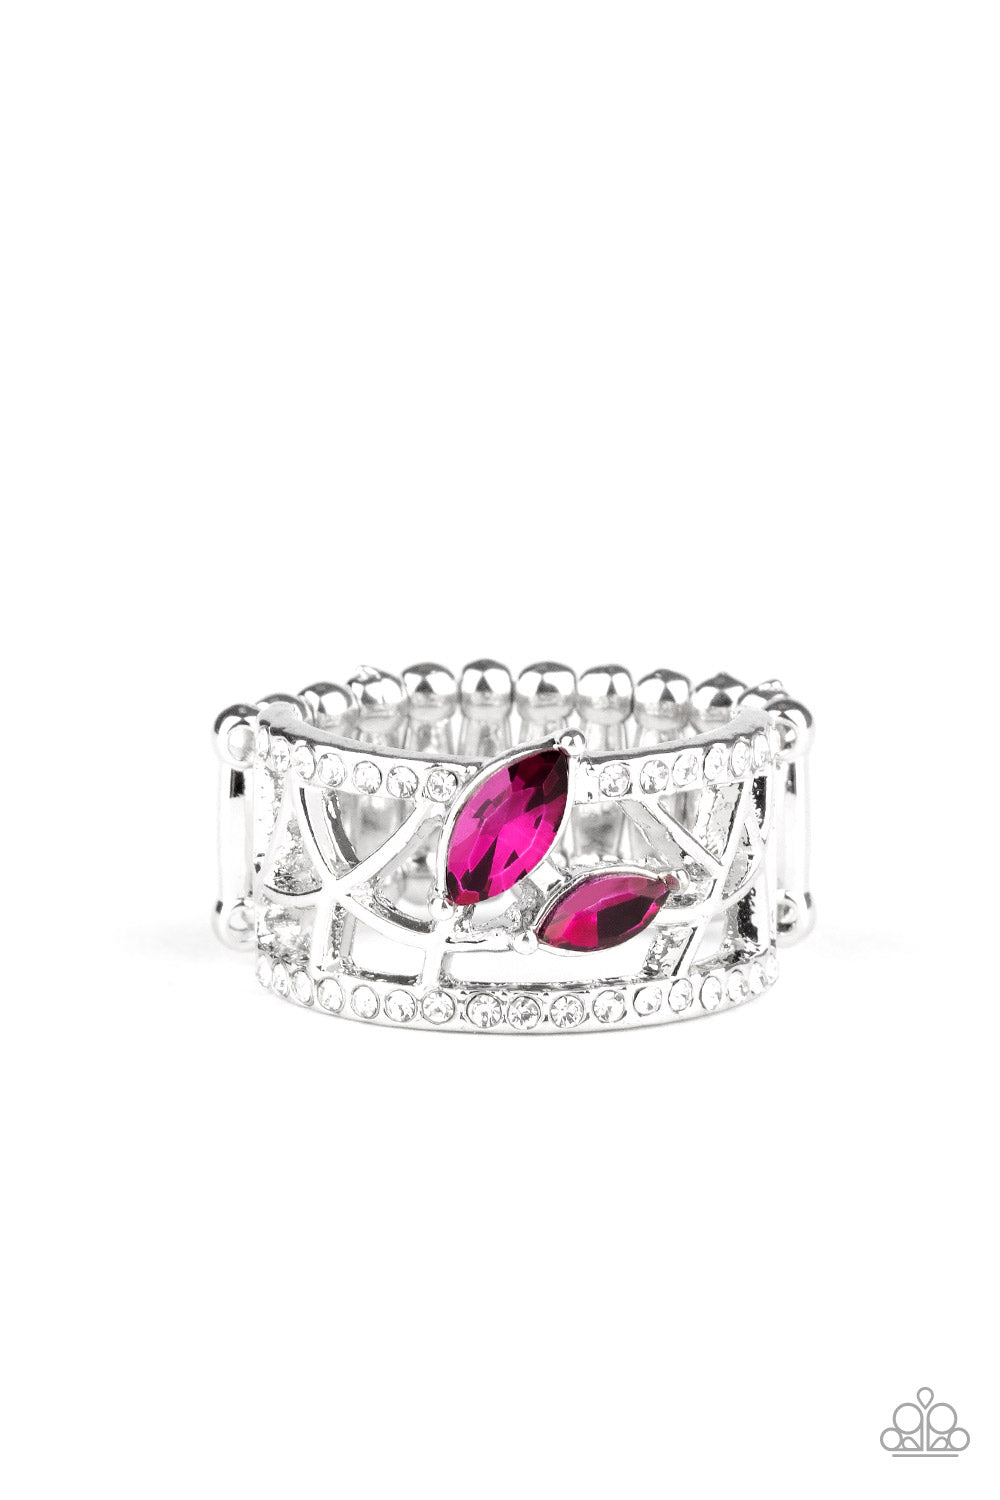 Paparazzi Rings - Tilted Twinkle - Pink